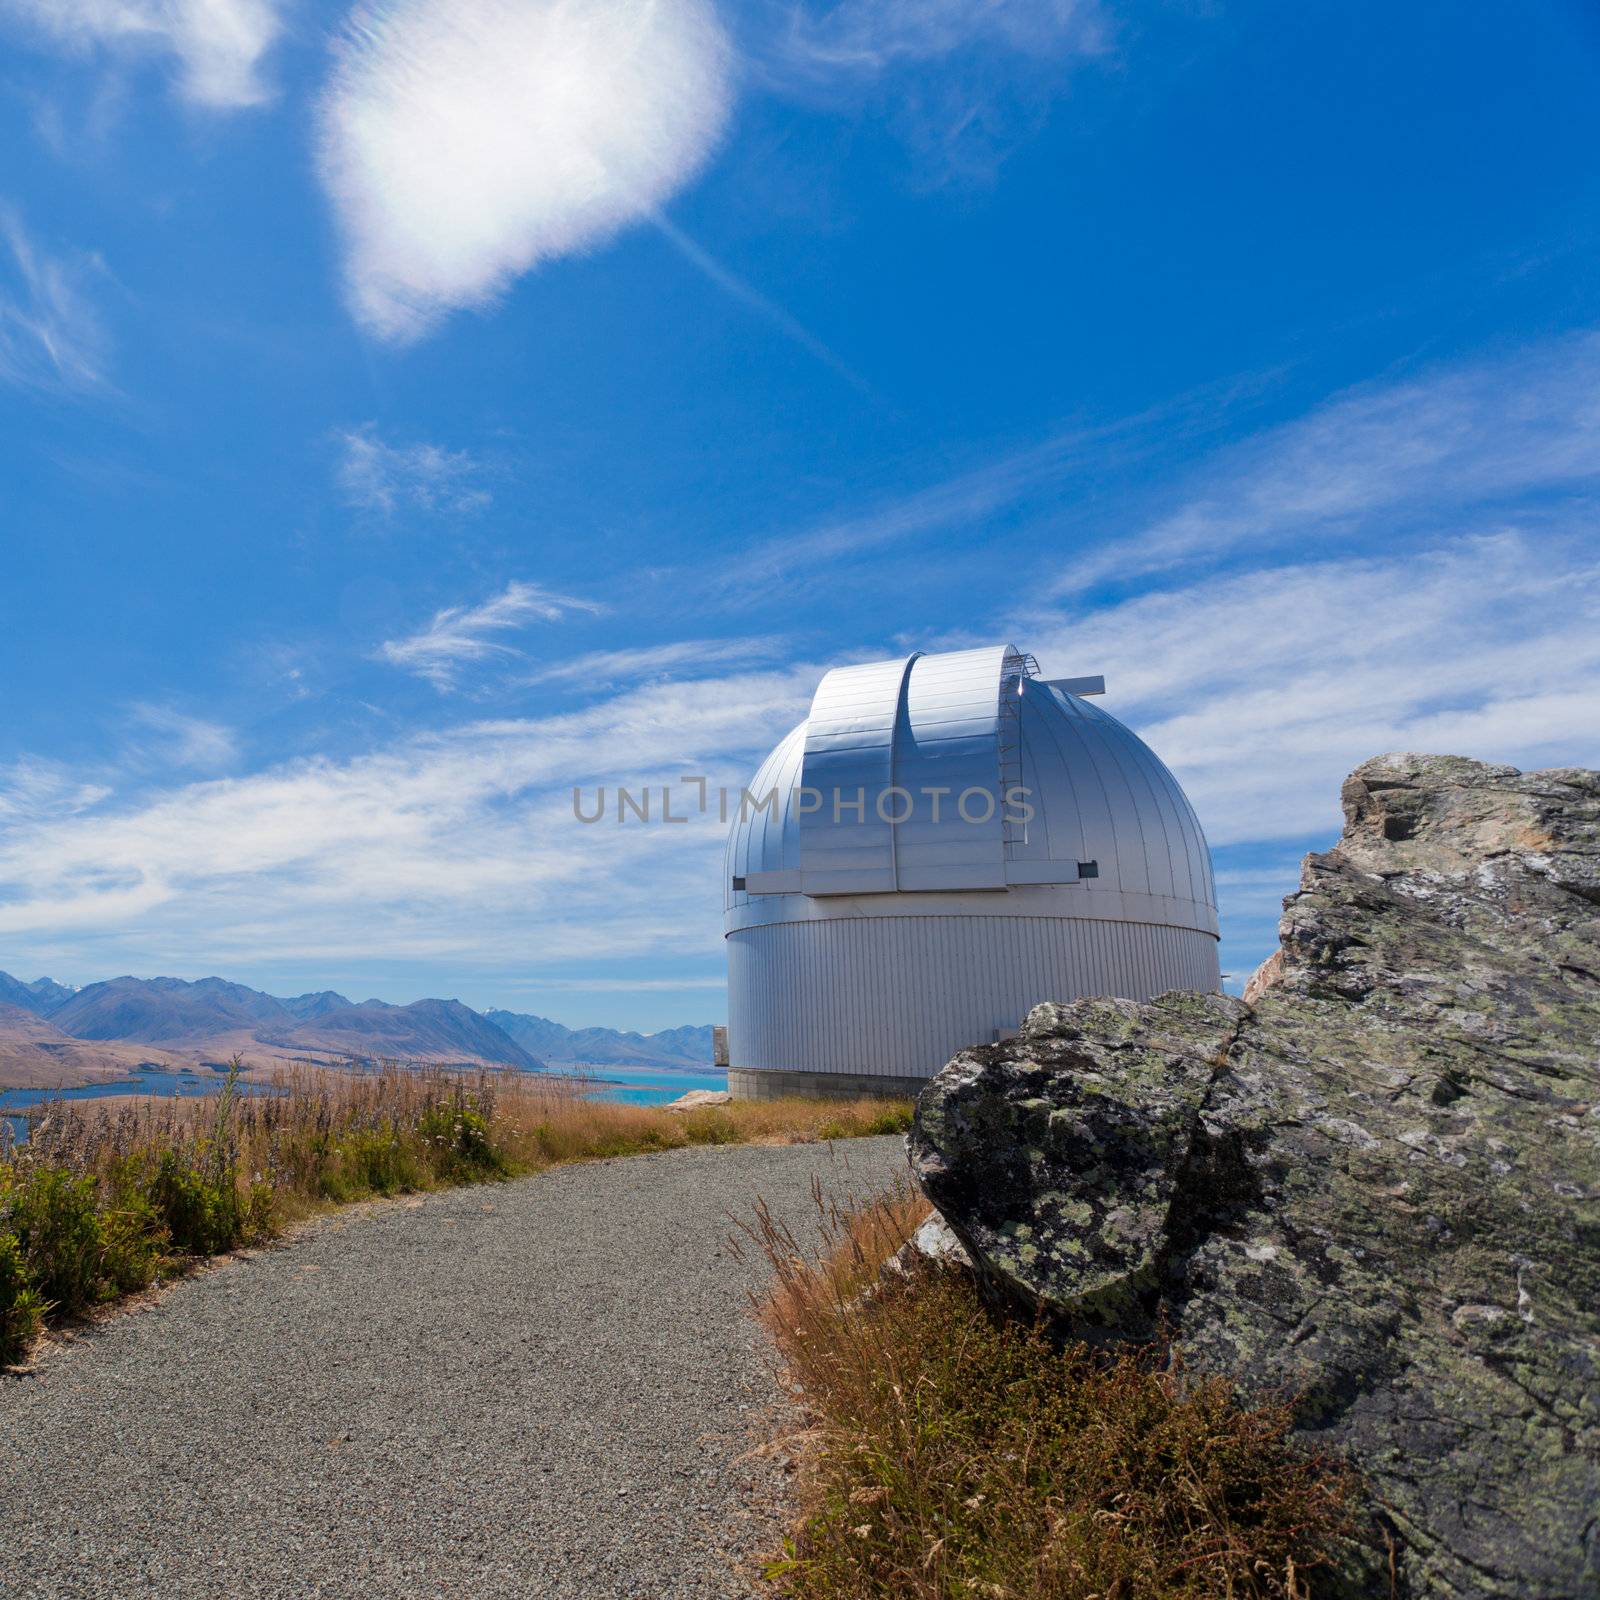 Domed astronomy observatory building housing a telescope for astronomical and meteorological observations standing on a mountain top to afford a clear view